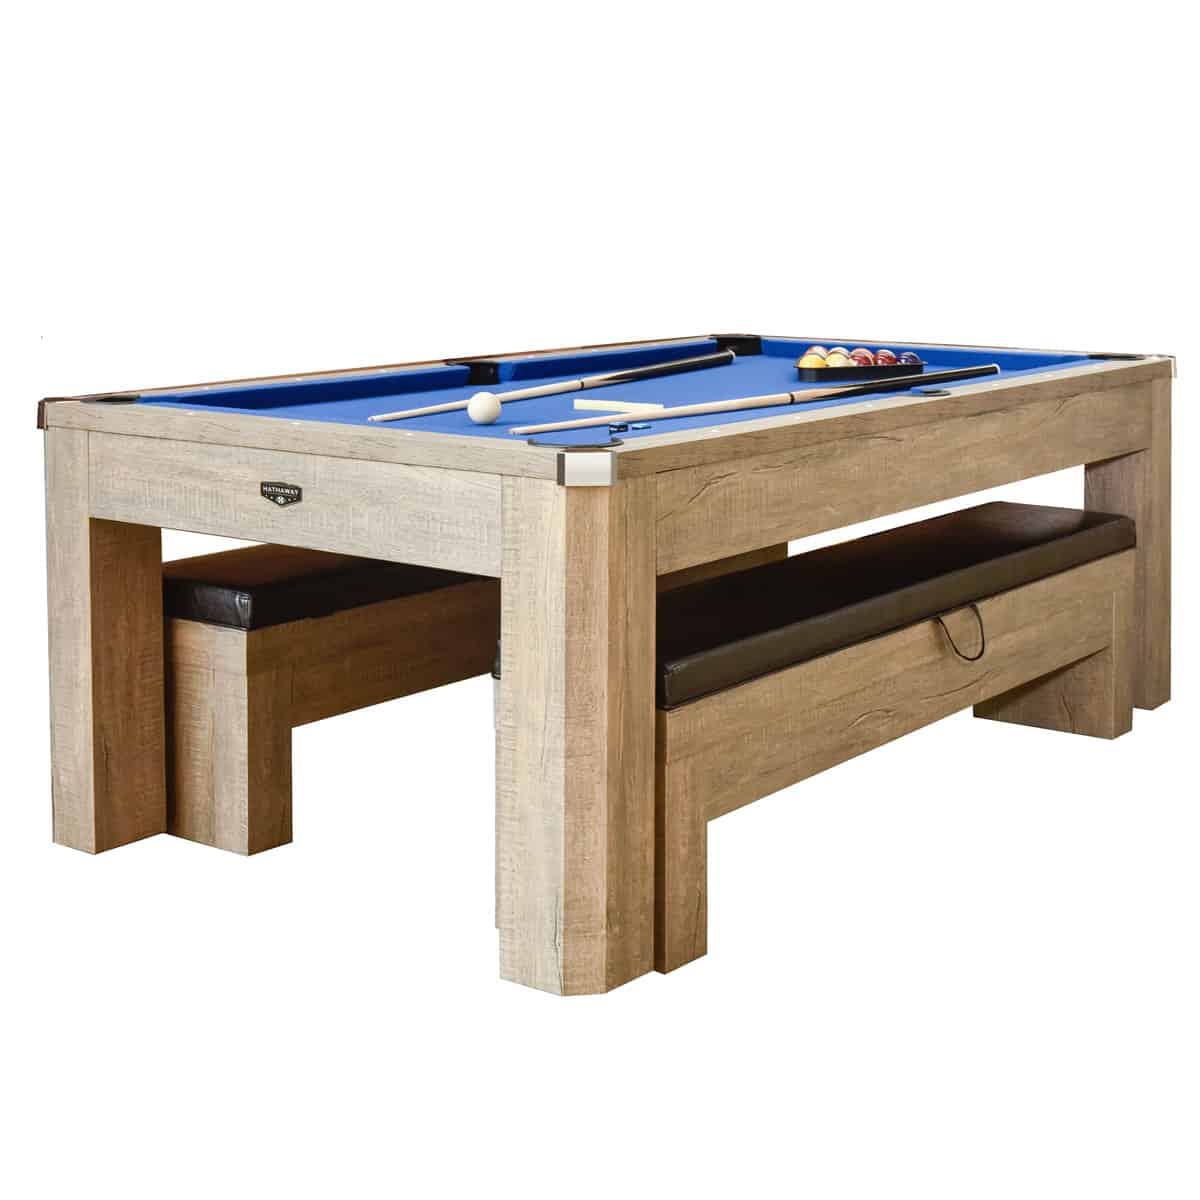 Newport 7' 3-in-1 Pool Table Combo w/ Benches - Blue Felt